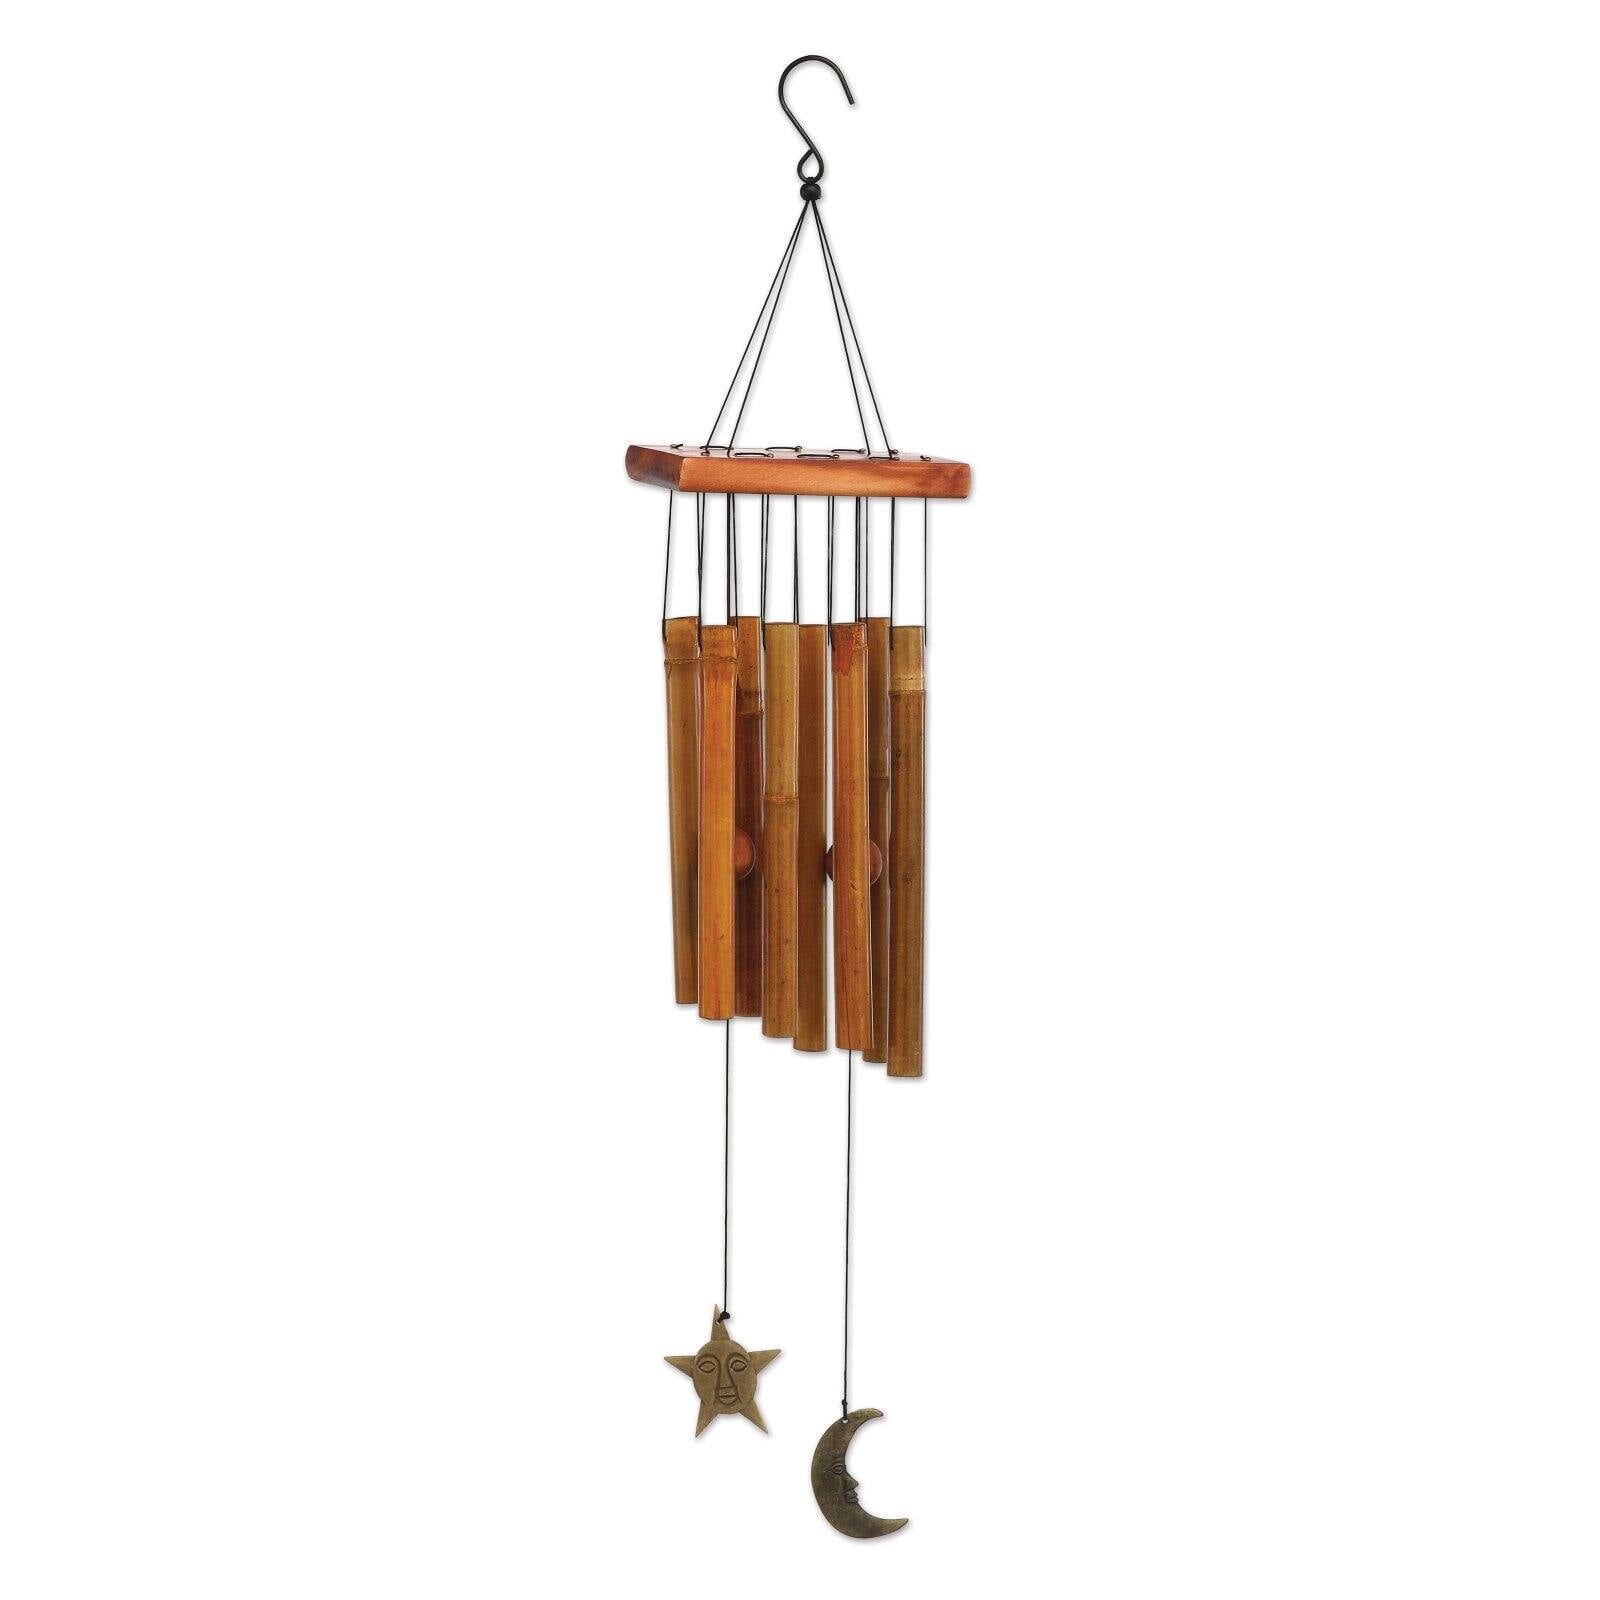 Rustic Metal Fishing Garden Wind Chime 27" Long by Sunset Vista 